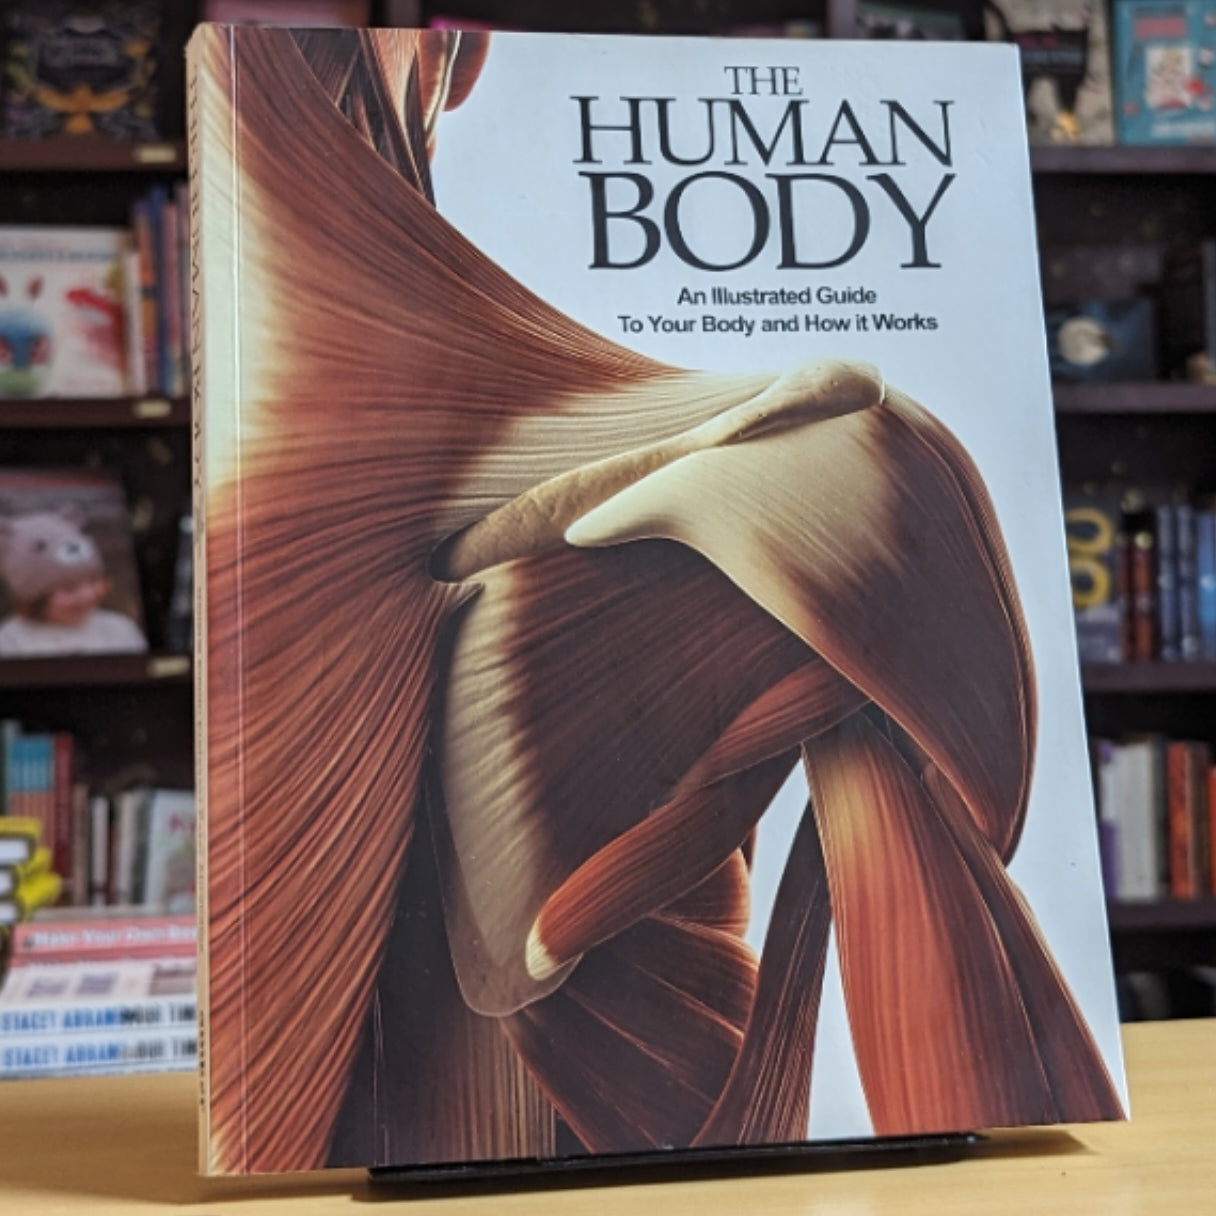 The Human Body: An Illustrated Guide to Your Body and How it Works